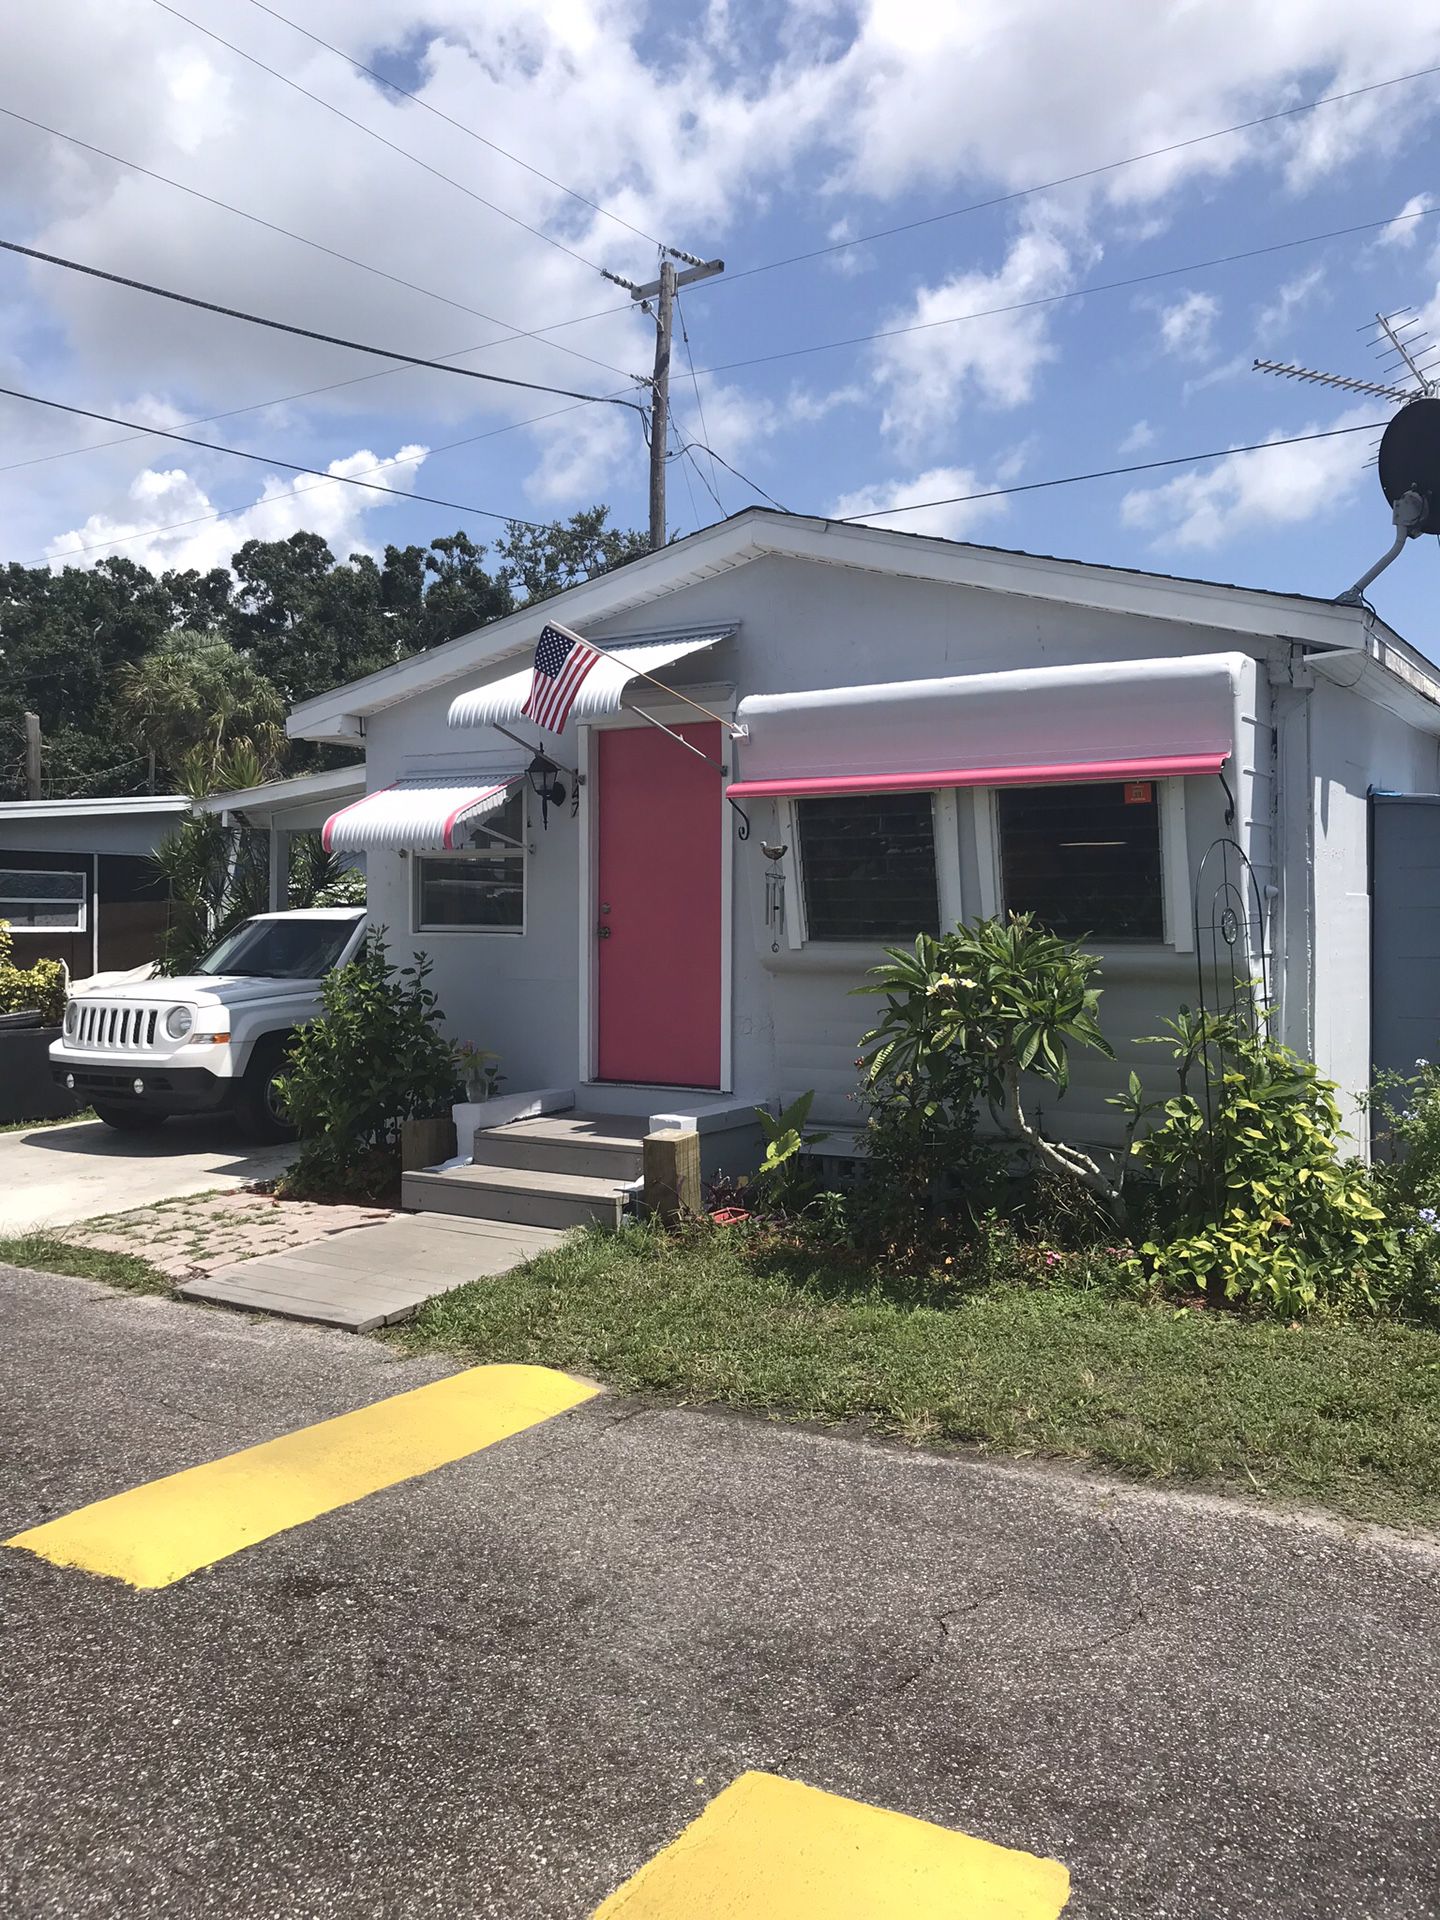 1 BR 1 BA Mobile home for sale